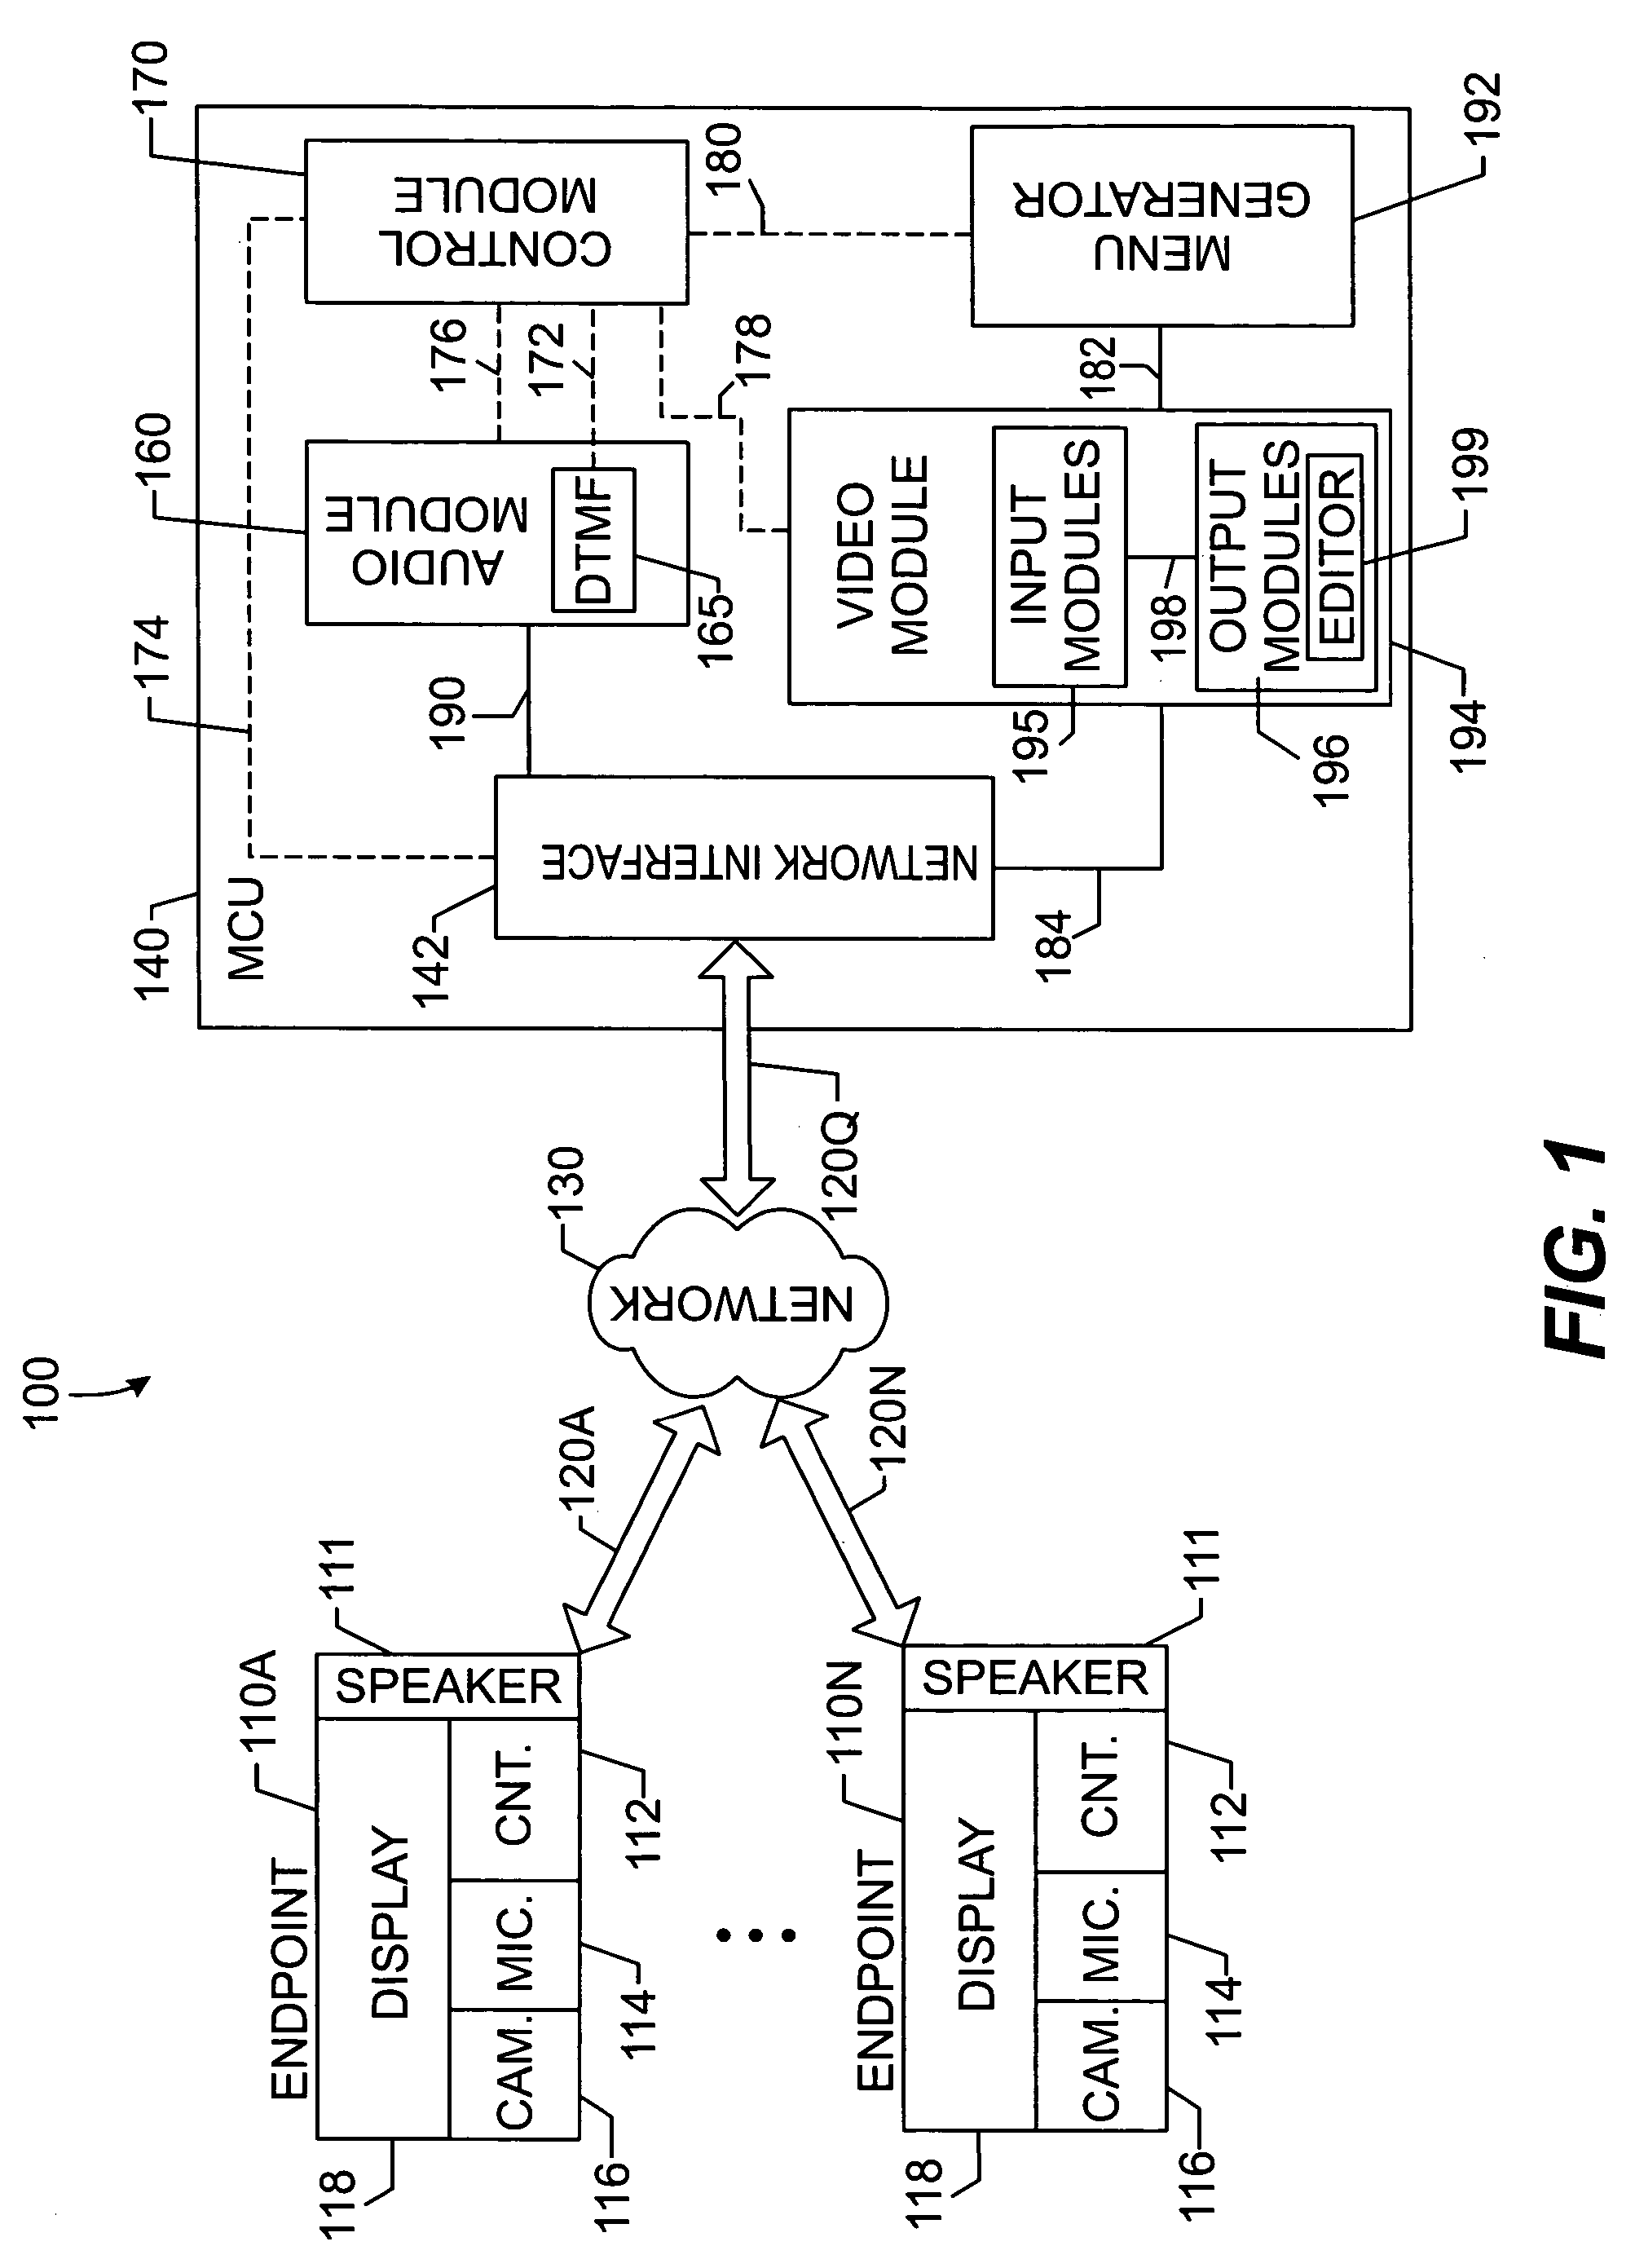 Method and system for allowing video-conference to choose between various associated video conferences